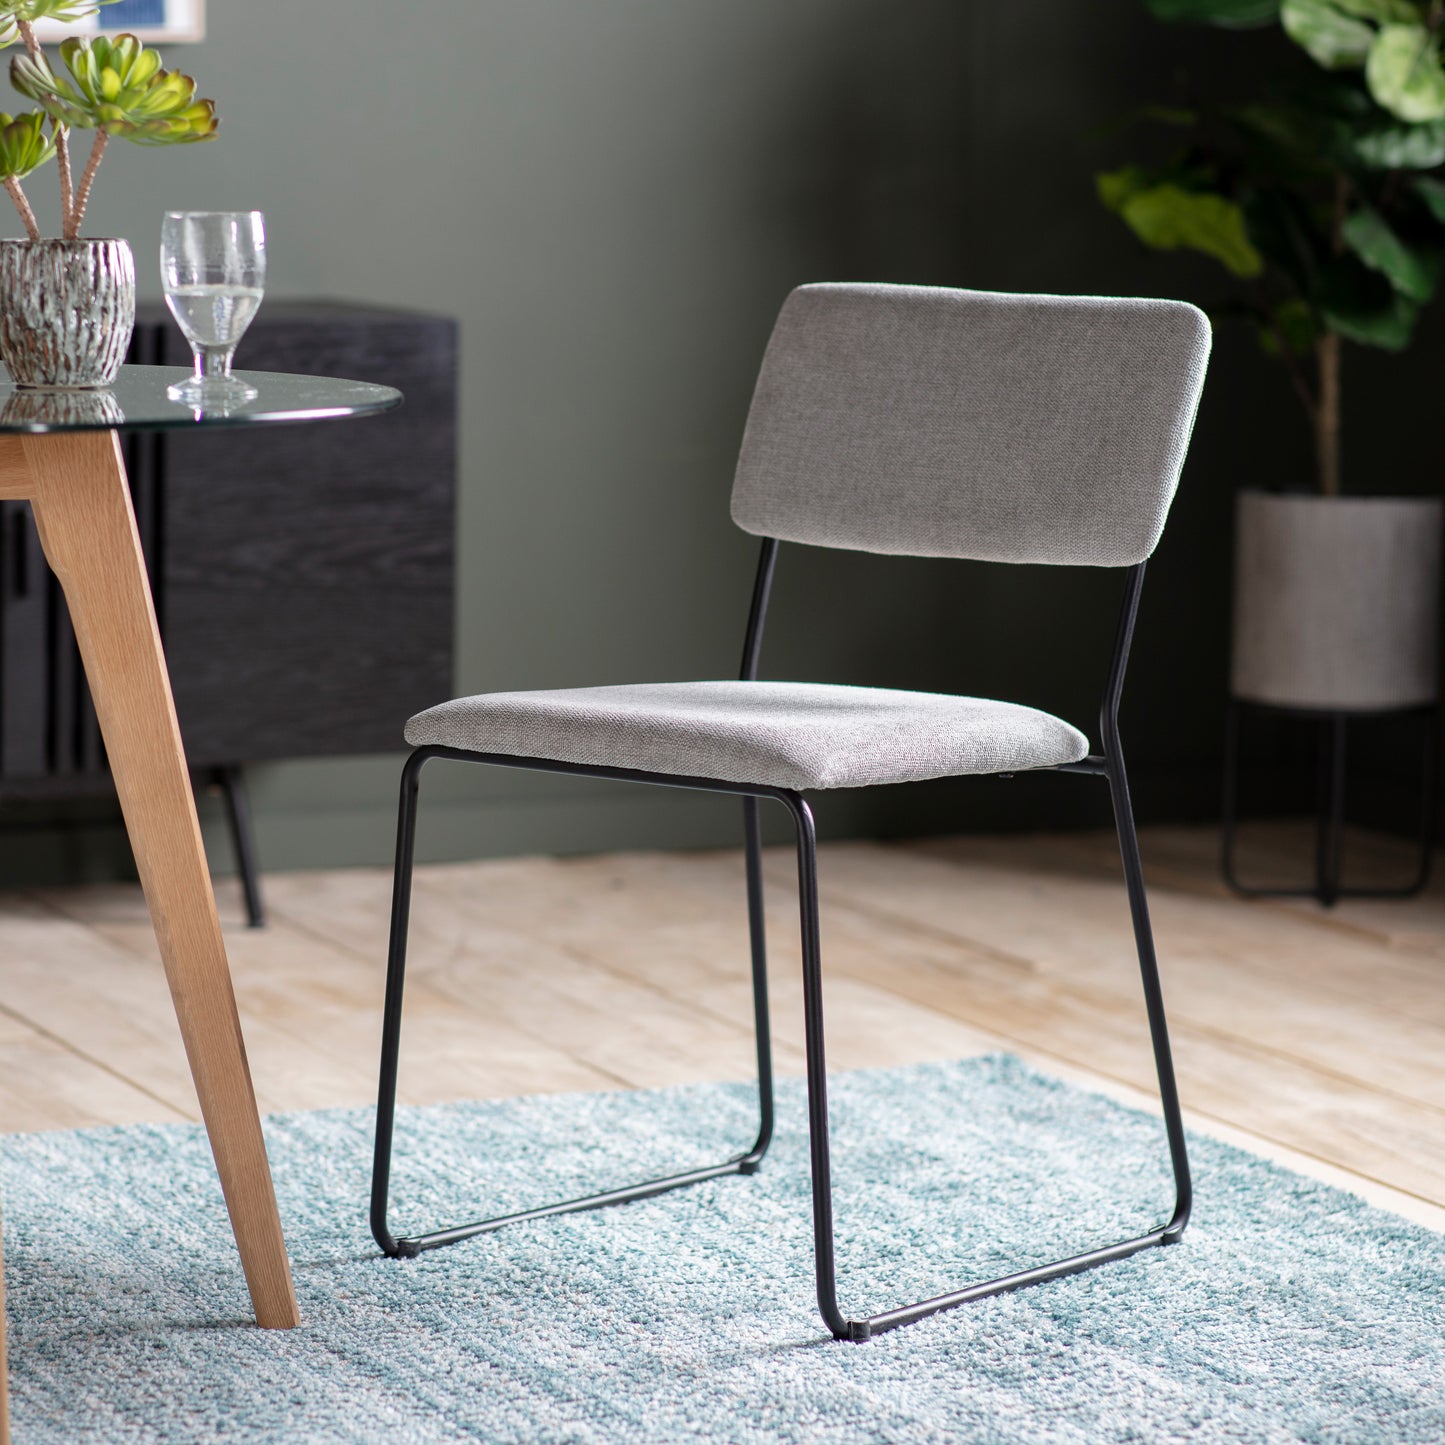 A Chivelstone Dining Chair Light Grey (2pk) by Kikiathome.co.uk in a room with interior decor and home furniture.